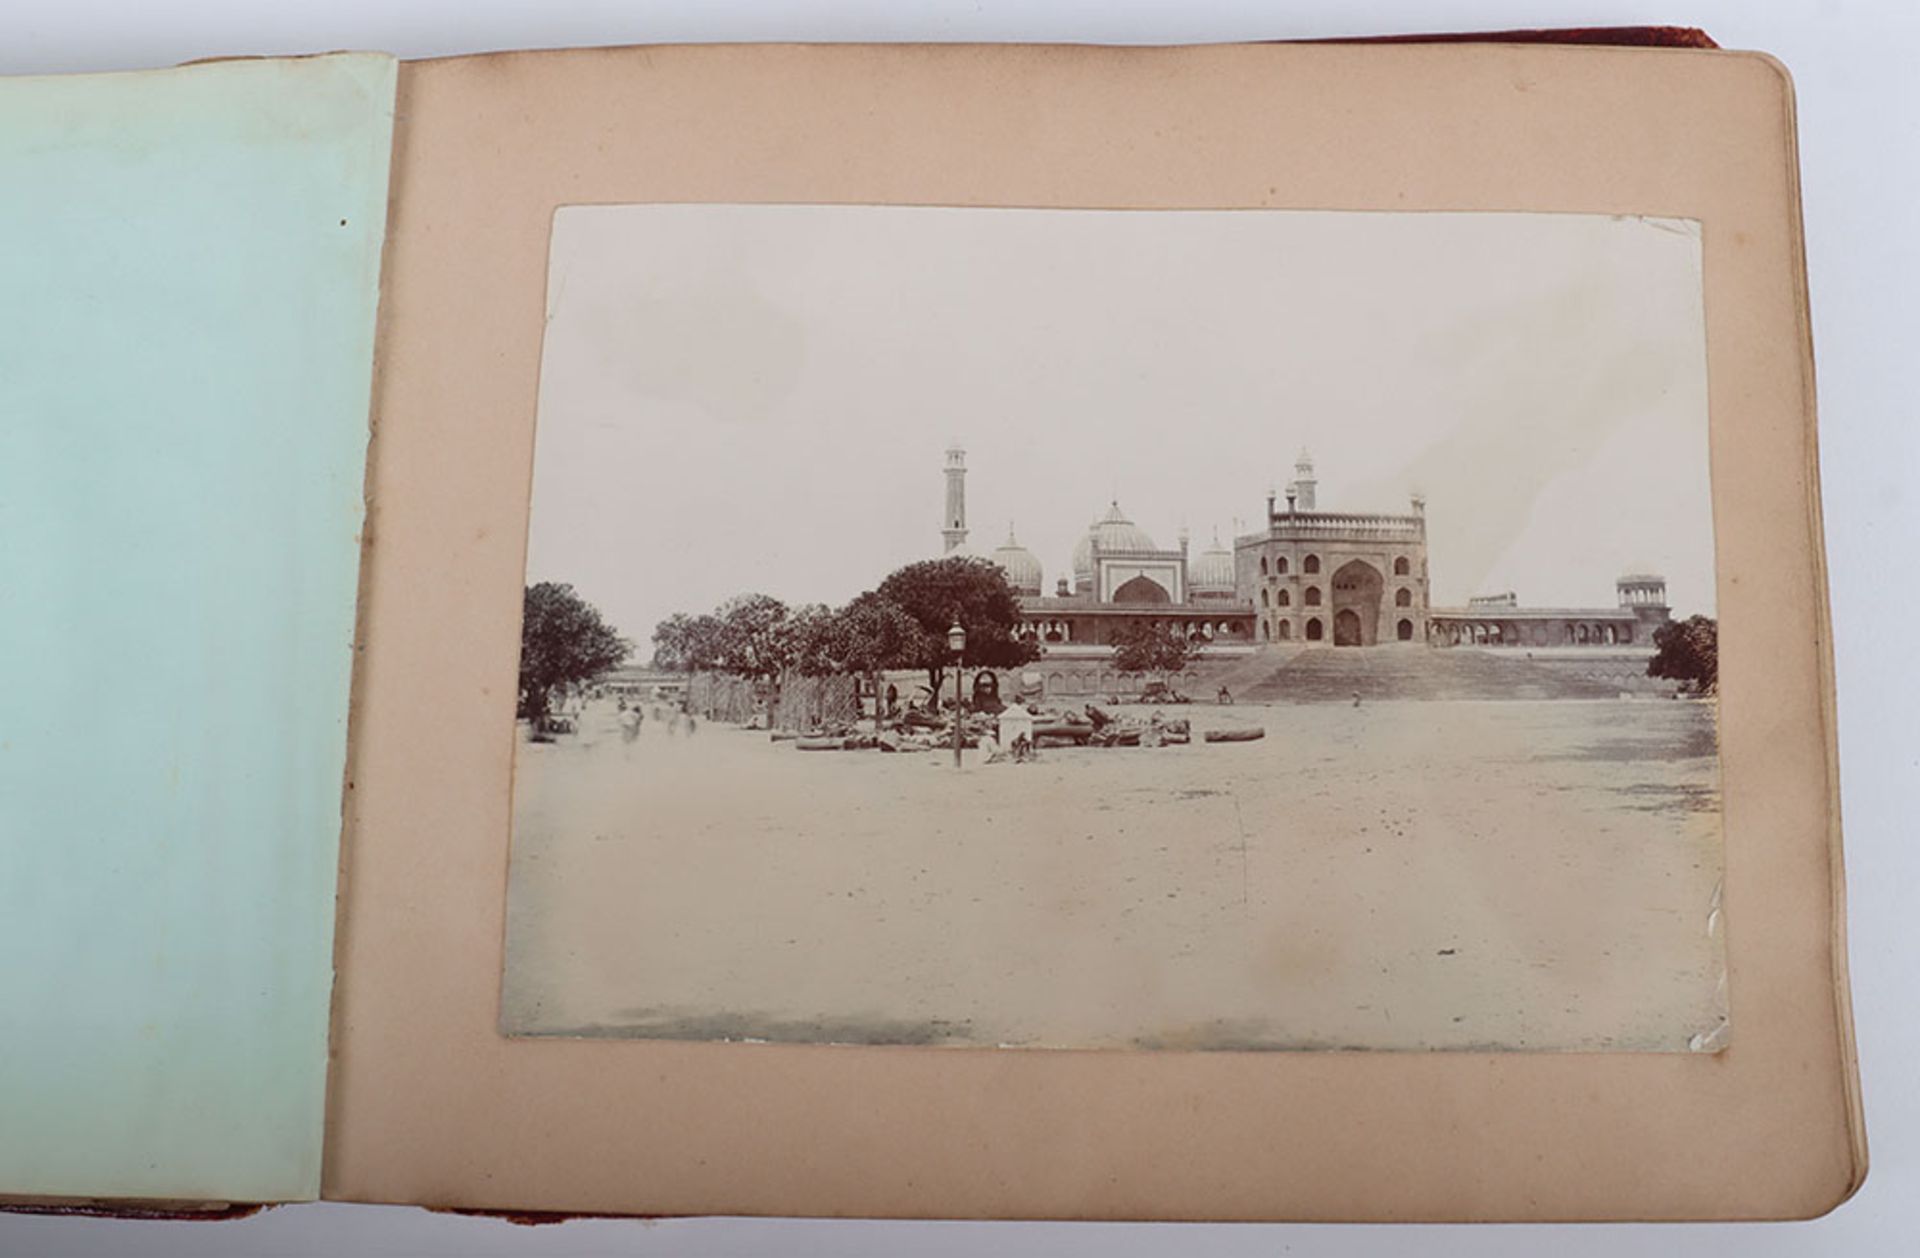 Photograph Album with images of ther Delhi Durbar, troops lining streets, Elephants, sacred cows bel - Image 18 of 48